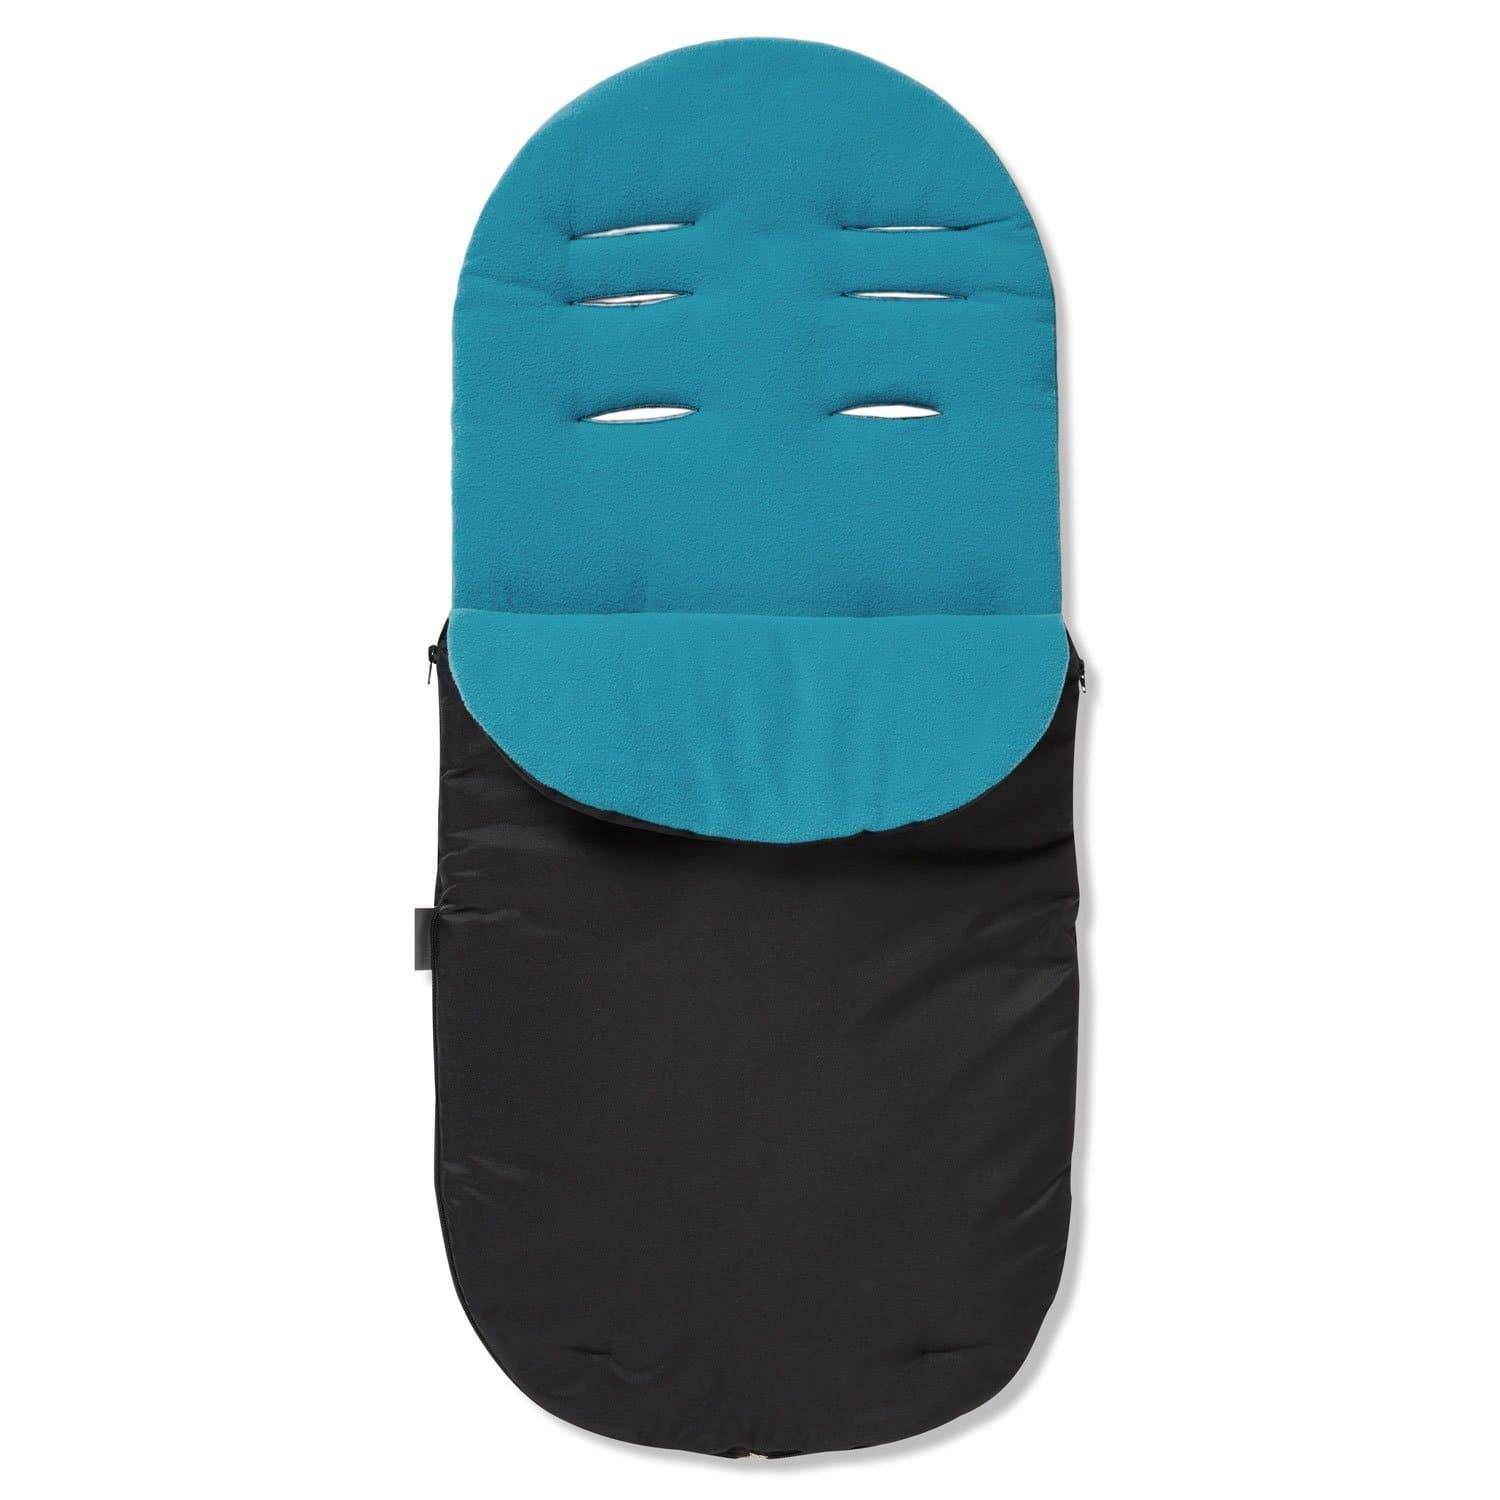 Footmuff / Cosy Toes Compatible with Maclaren - Turquoise / Fits All Models | For Your Little One